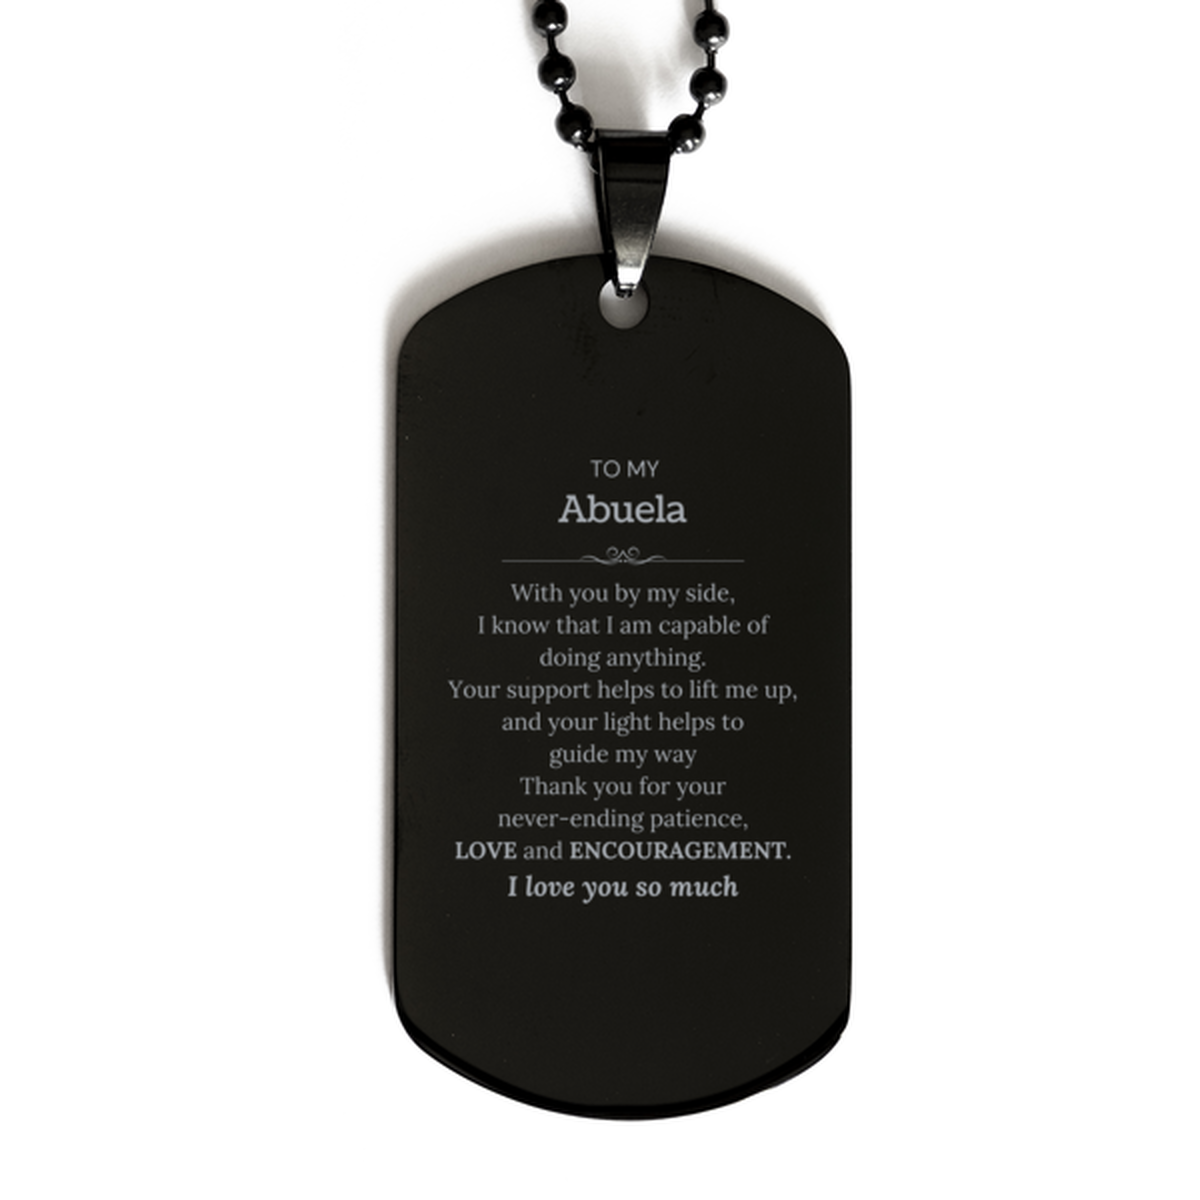 Appreciation Abuela Black Dog Tag Gifts, To My Abuela Birthday Christmas Wedding Keepsake Gifts for Abuela With you by my side, I know that I am capable of doing anything. I love you so much